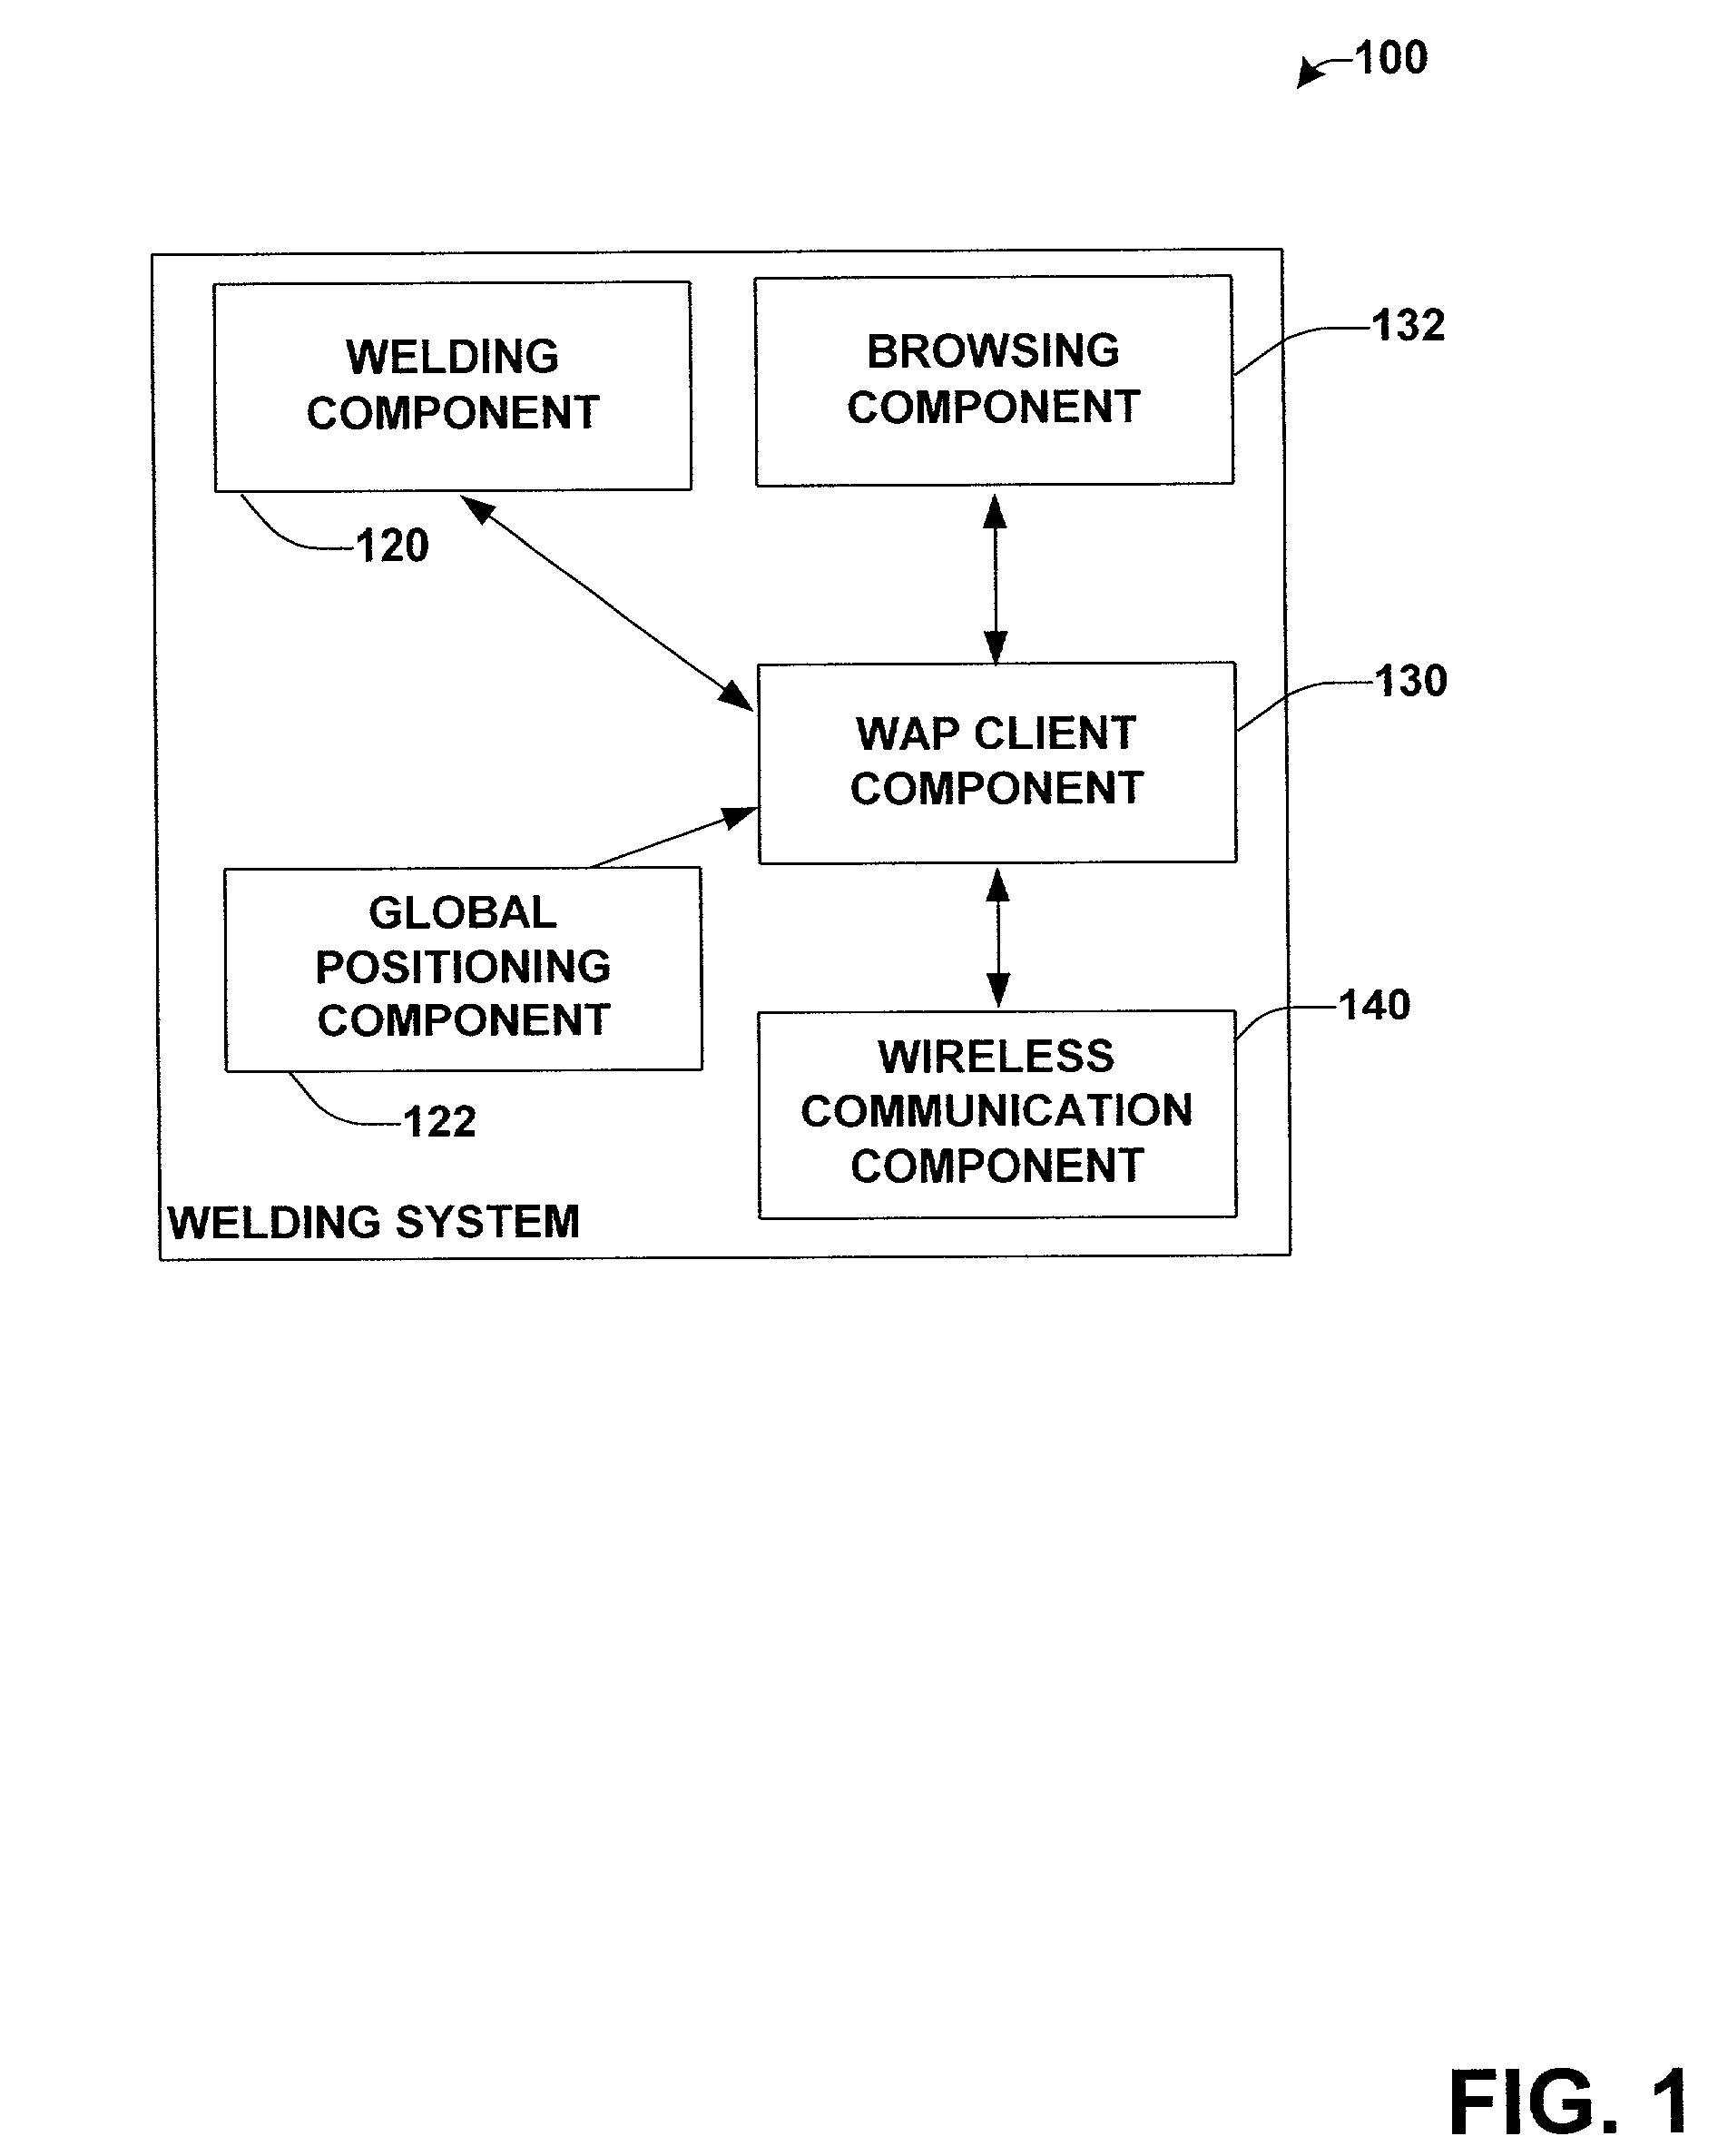 System and method to facilitate wireless wide area communication in a welding environment